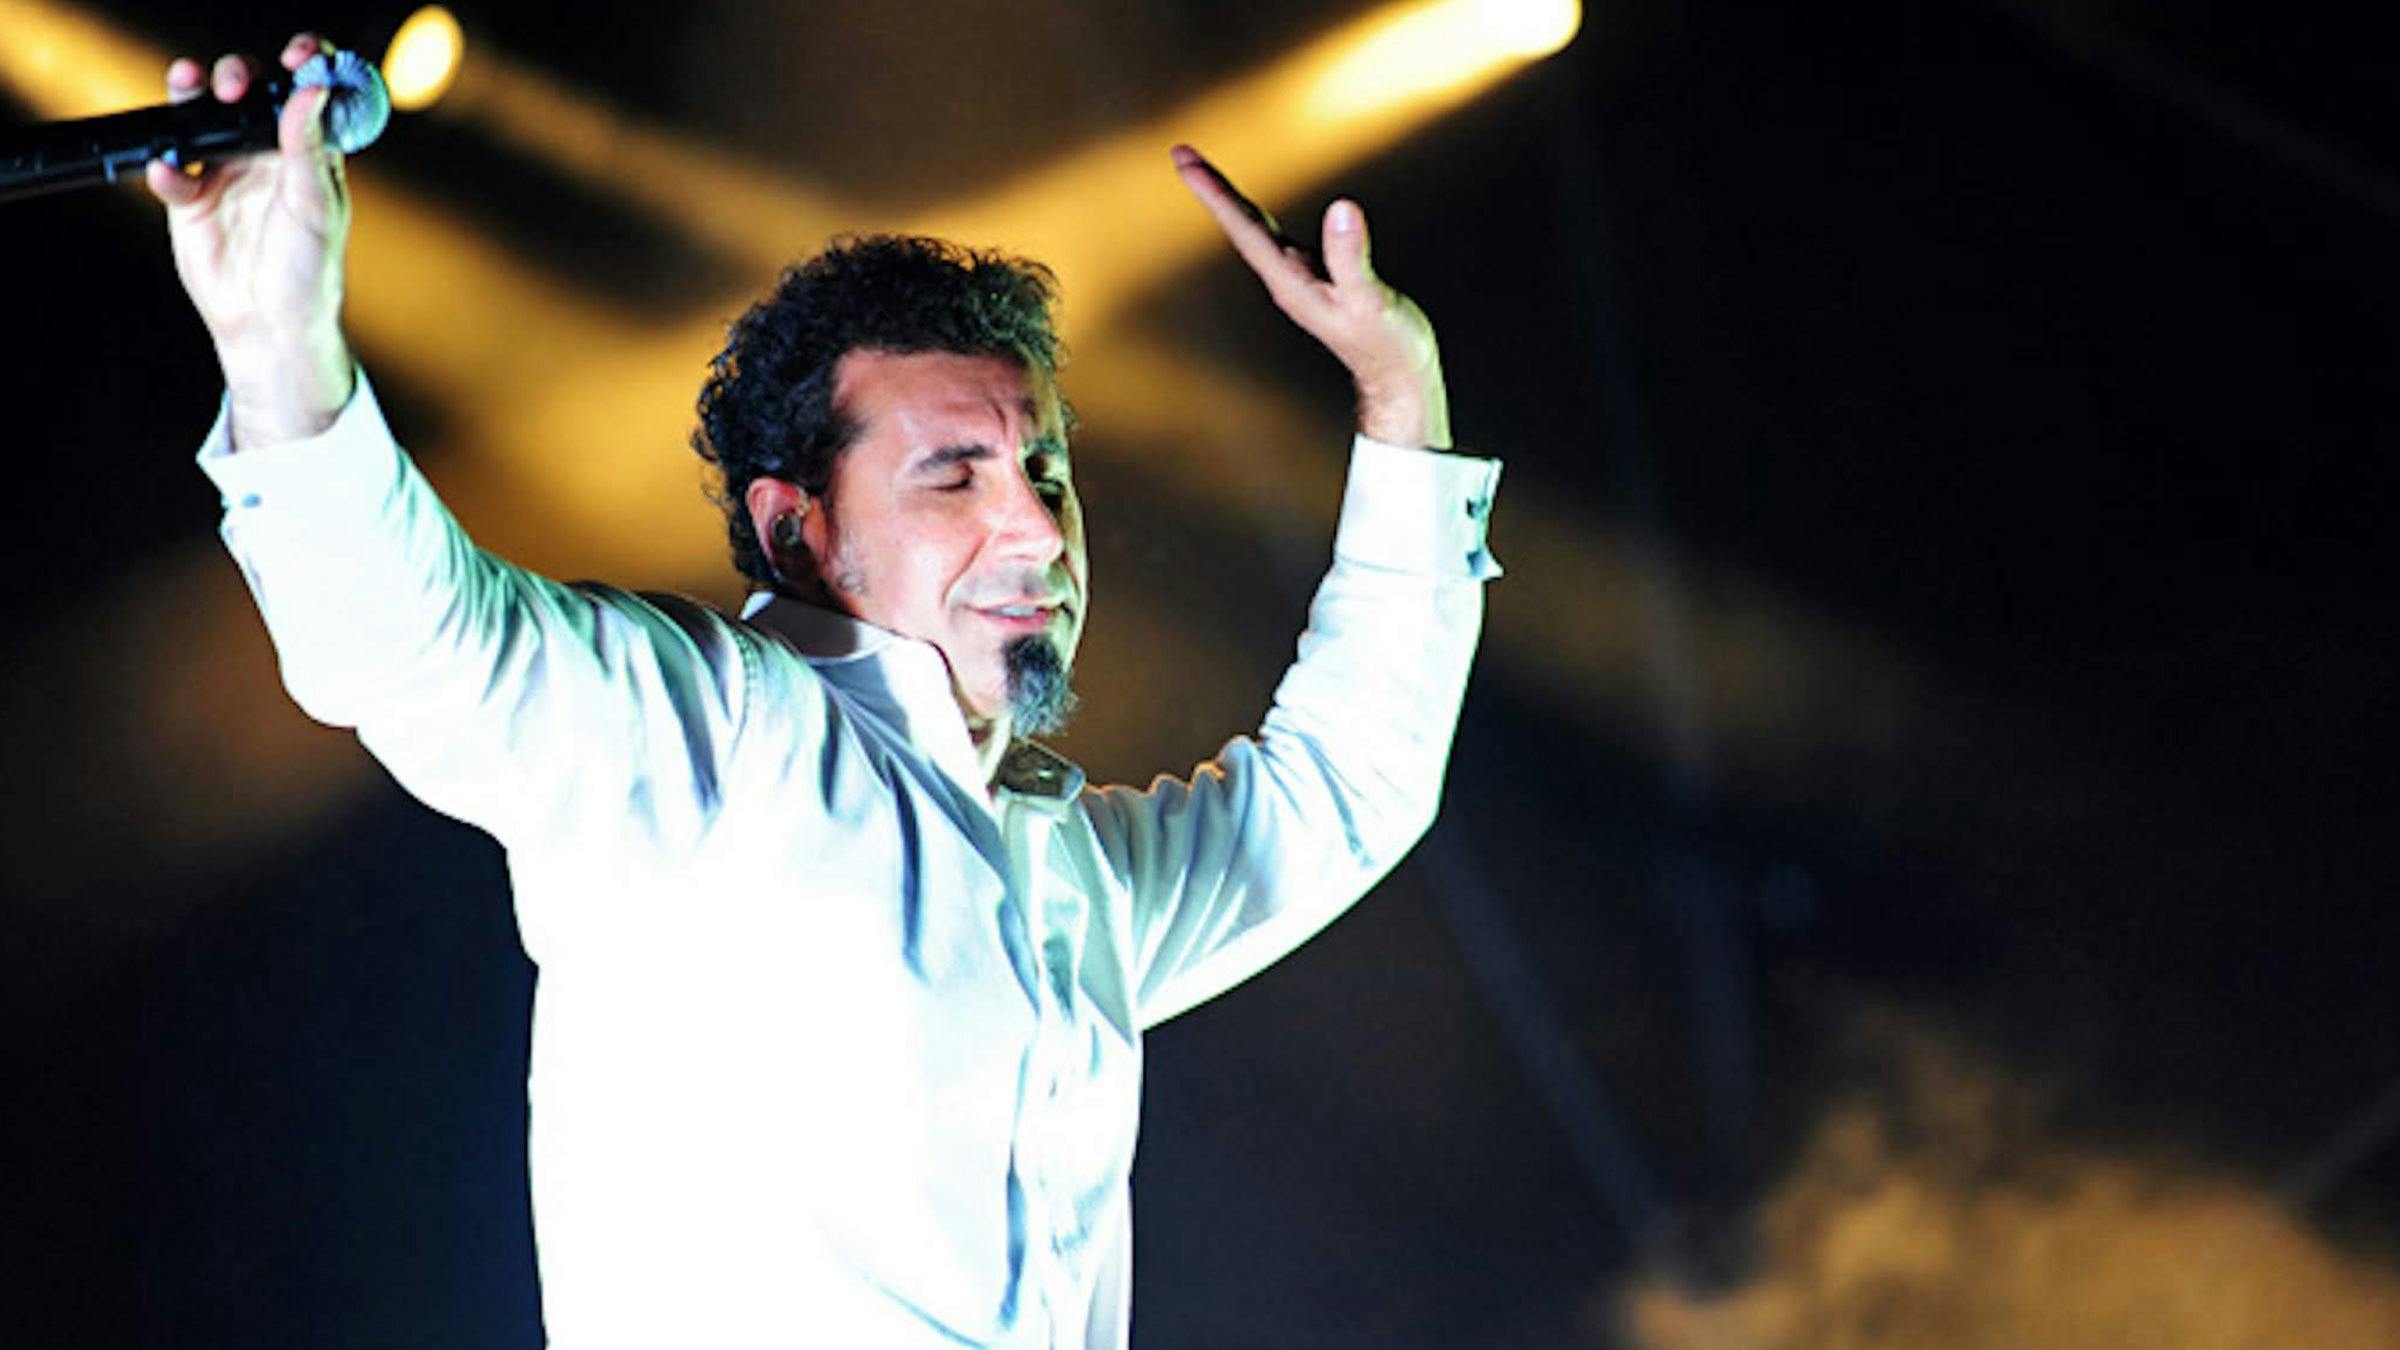 Serj Tankian On His Upcoming Rock EP: "It’s Not Toxicity But It Is Toxicity"